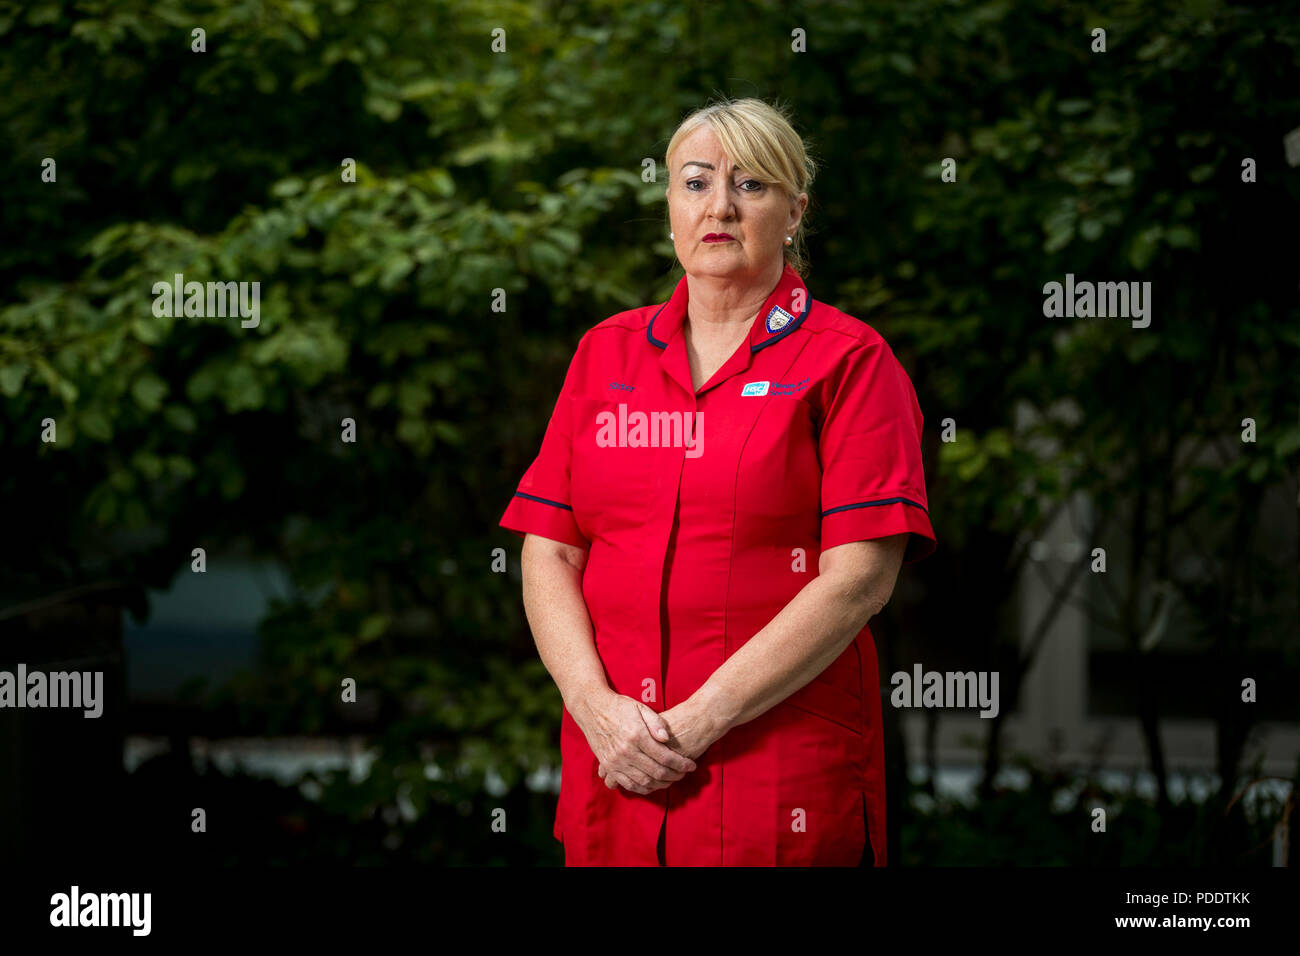 Sister Joann McCullagh at Omagh Hospital, who is a nurse that treated victims of the Omagh bombing at the Tyrone County Hospital in 1998. The sister has recalled that day as the darkest of her life. Stock Photo